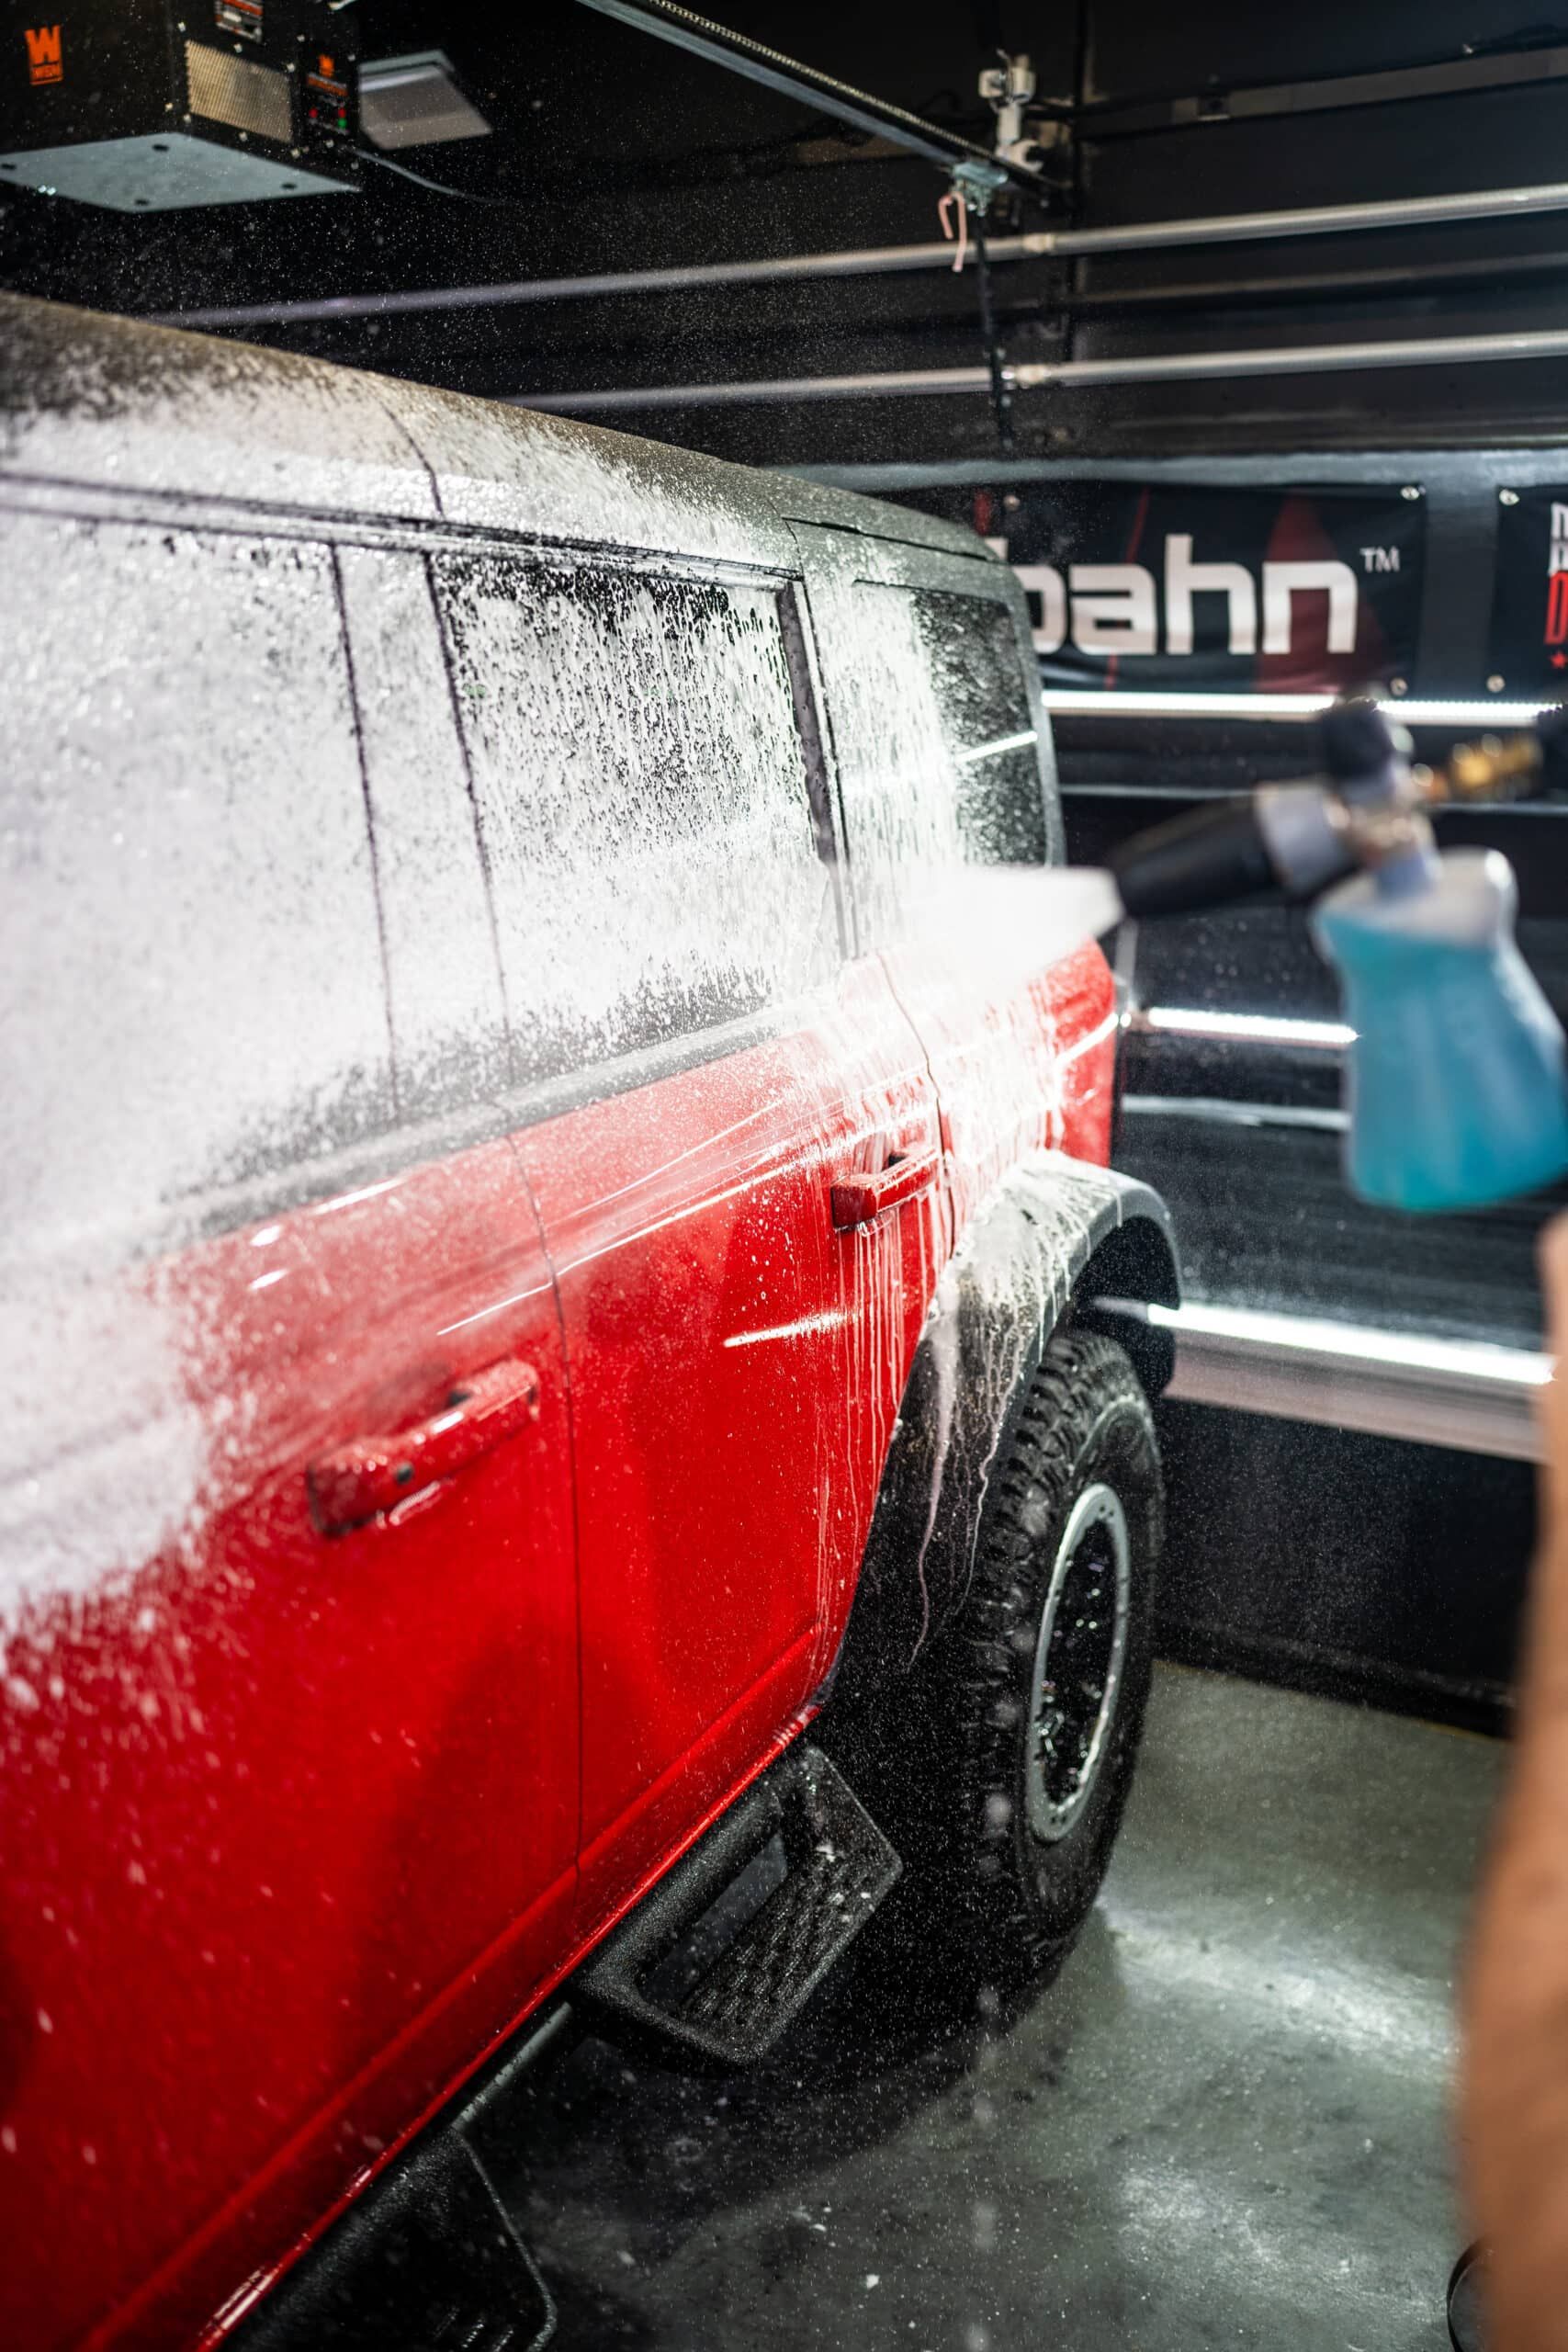 A red suv is being washed with foam in a garage.